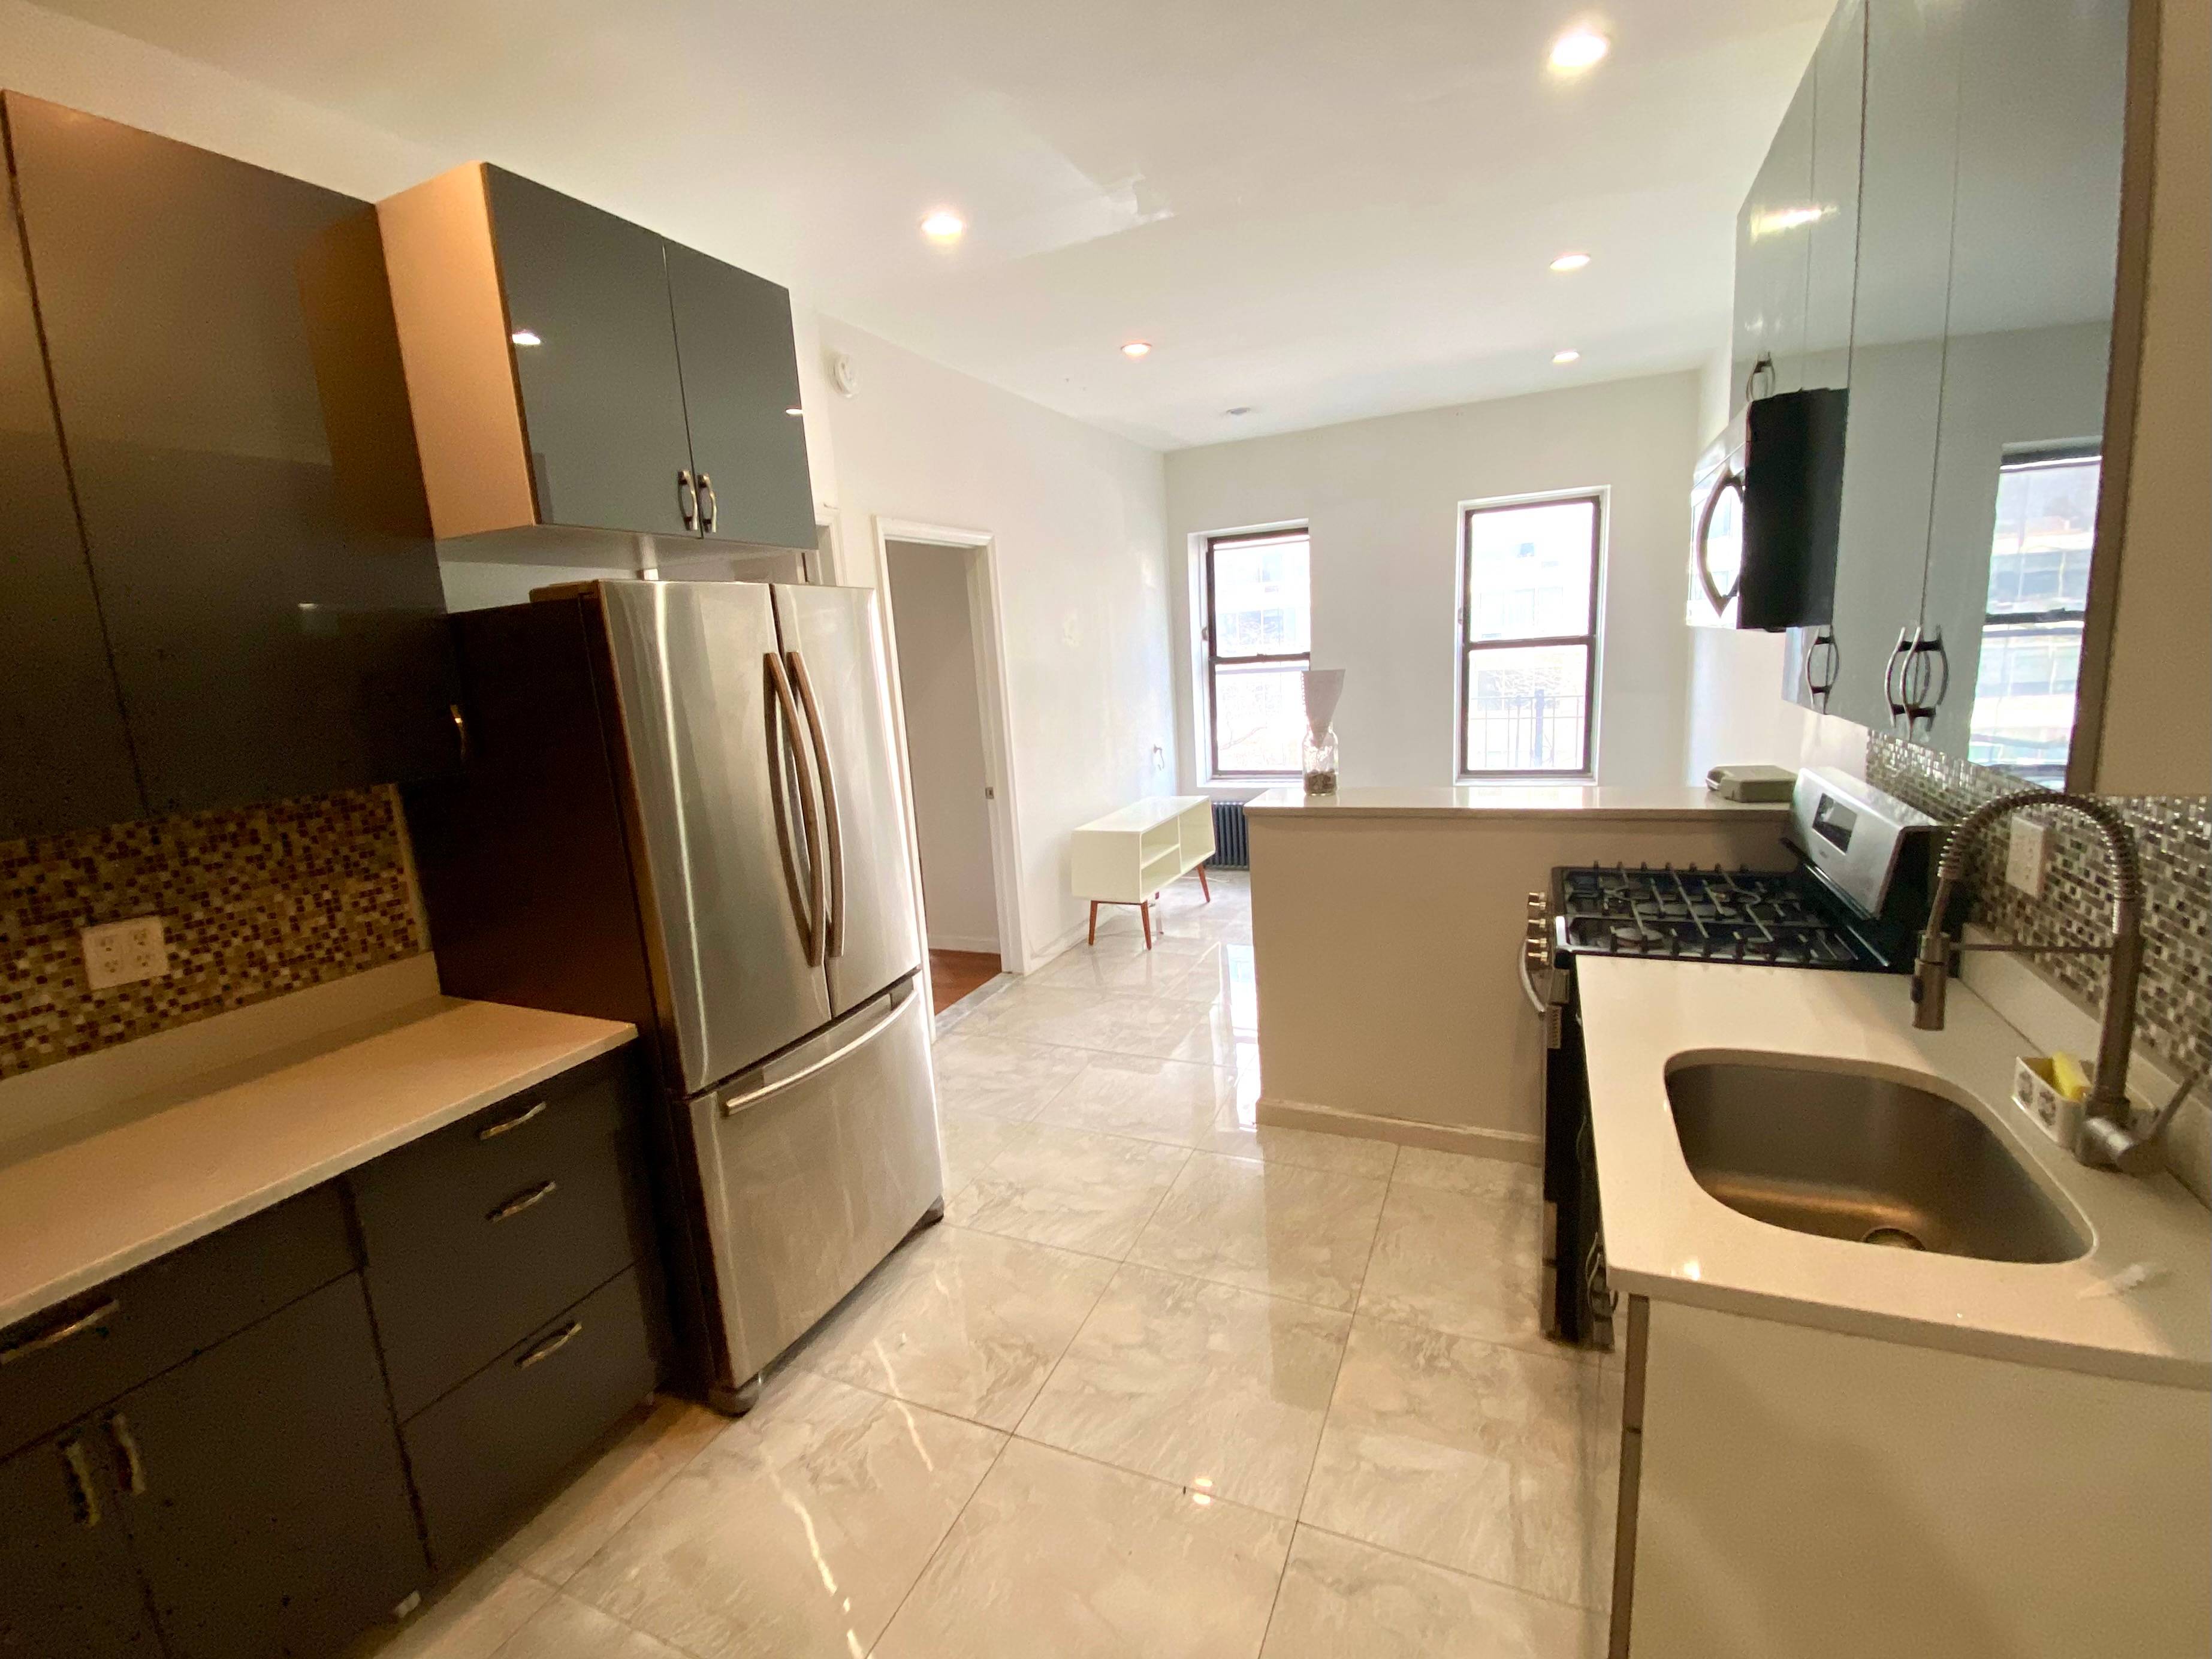 Welcome home to this beautifully renovated 2 bedroom home office apartment in the Lower East Side !